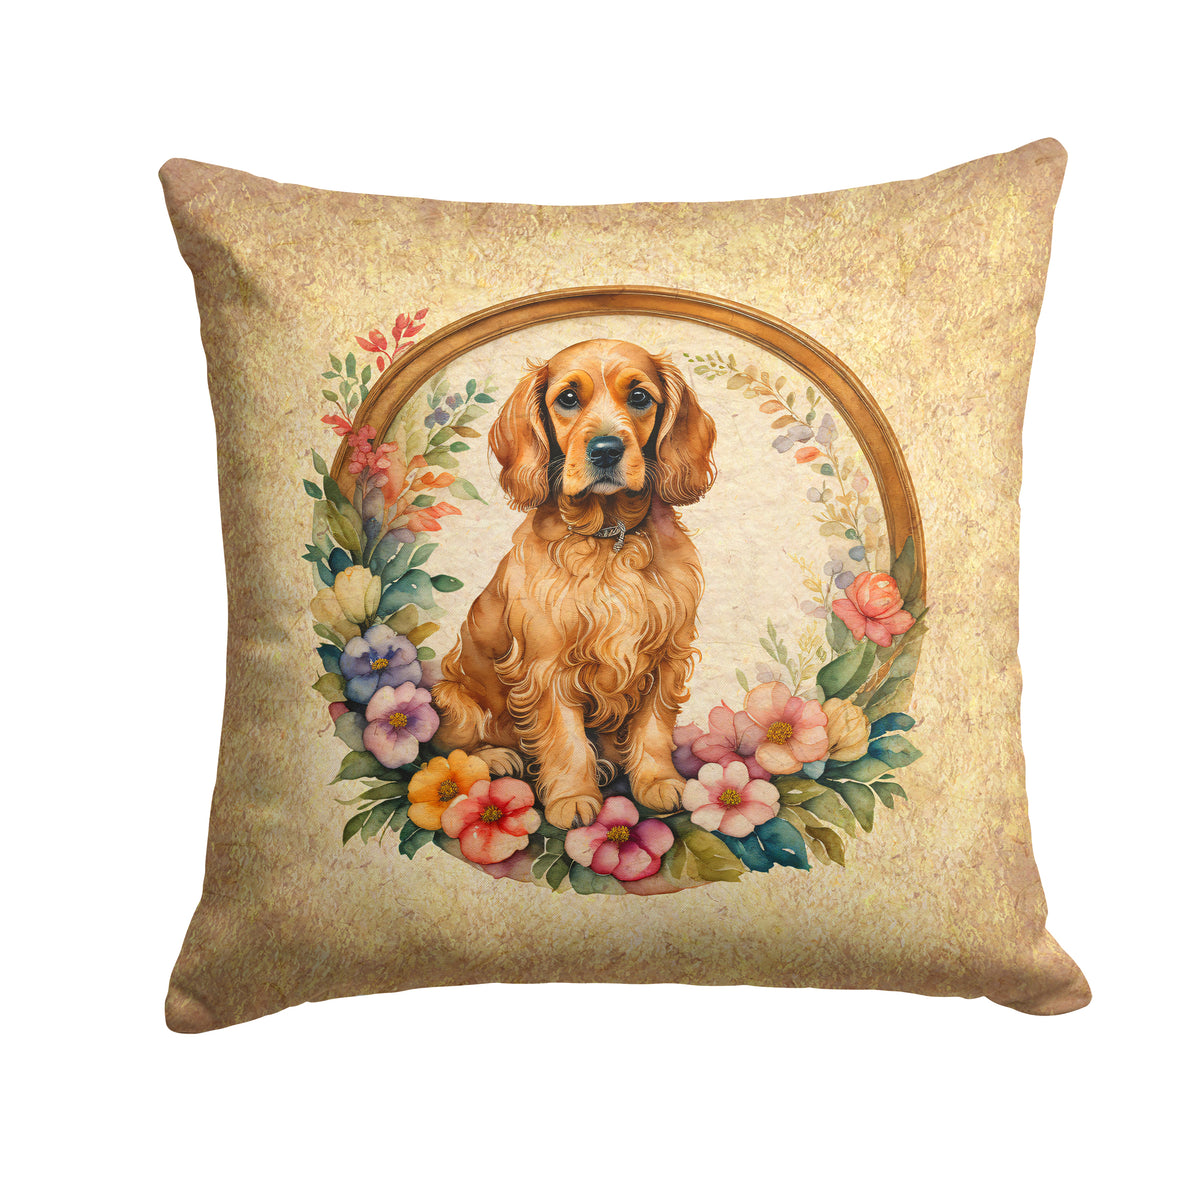 Buy this Cocker Spaniel and Flowers Fabric Decorative Pillow